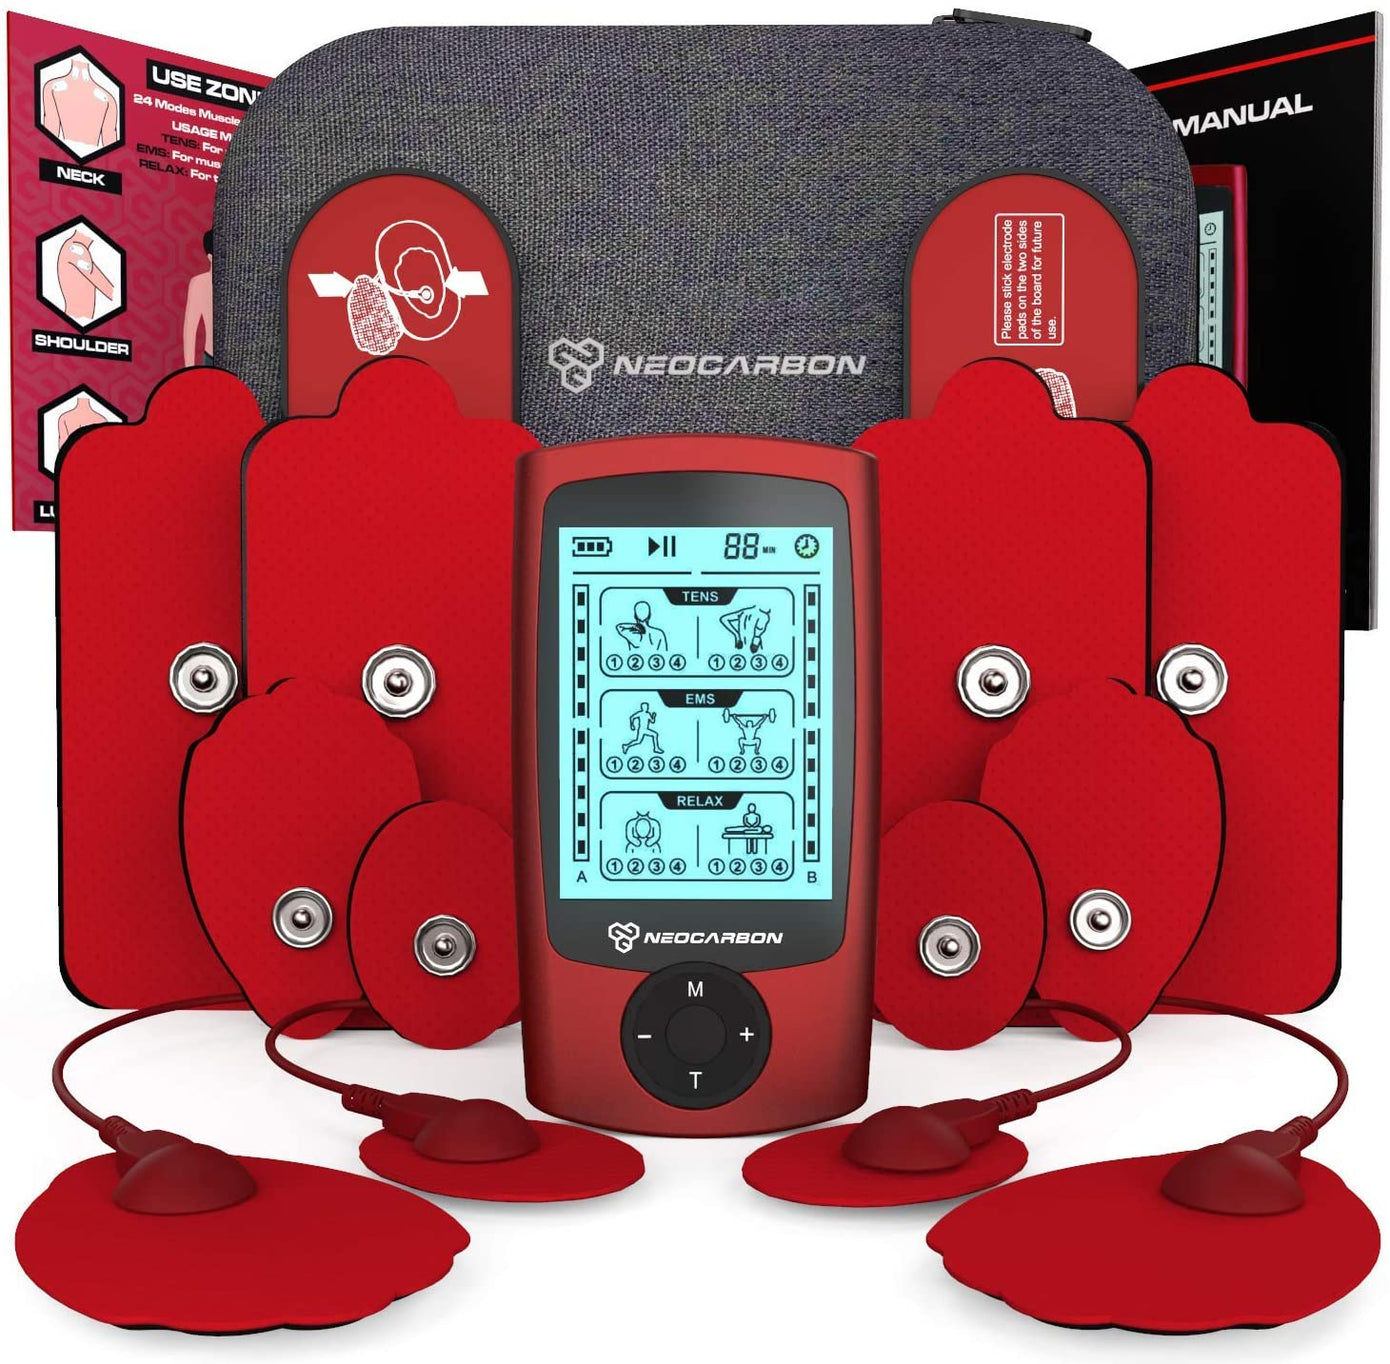 https://www.momjunction.com/wp-content/uploads/product-images/dual-channel-tens-ems-and-relax-muscle-stimulator-electronic-pulse-massager-unit-16-electrode-pads-travel-case_afl276.jpg